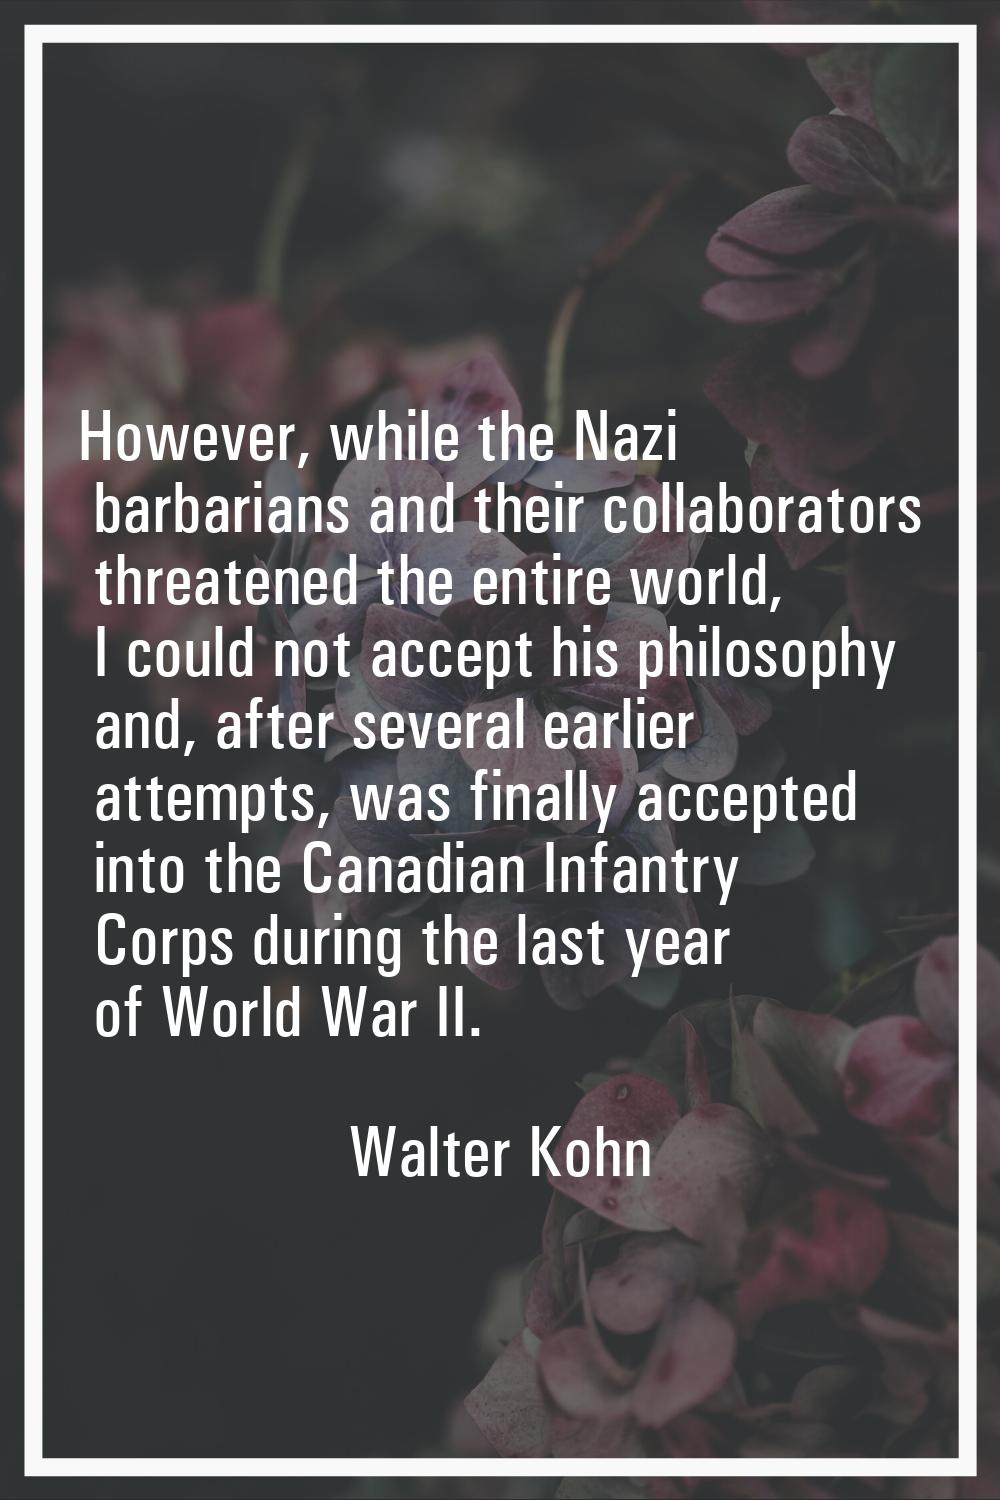 However, while the Nazi barbarians and their collaborators threatened the entire world, I could not